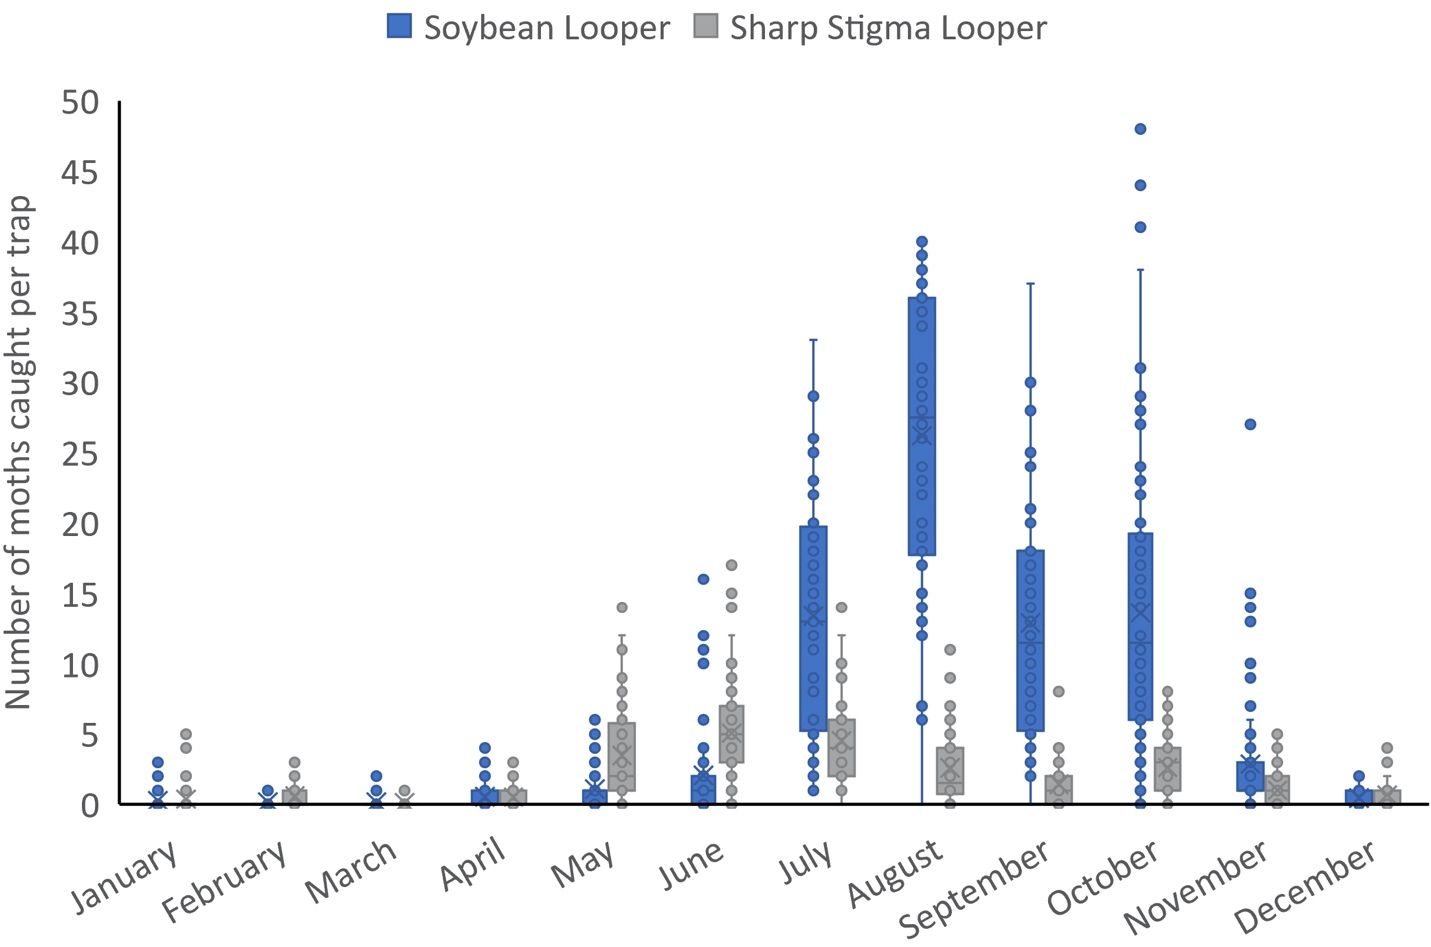 Monthly abundance of soybean looper and the cross-attracted sharp stigma looper during year-round pheromone trapping in the Florida Panhandle 2017 to 2019. 